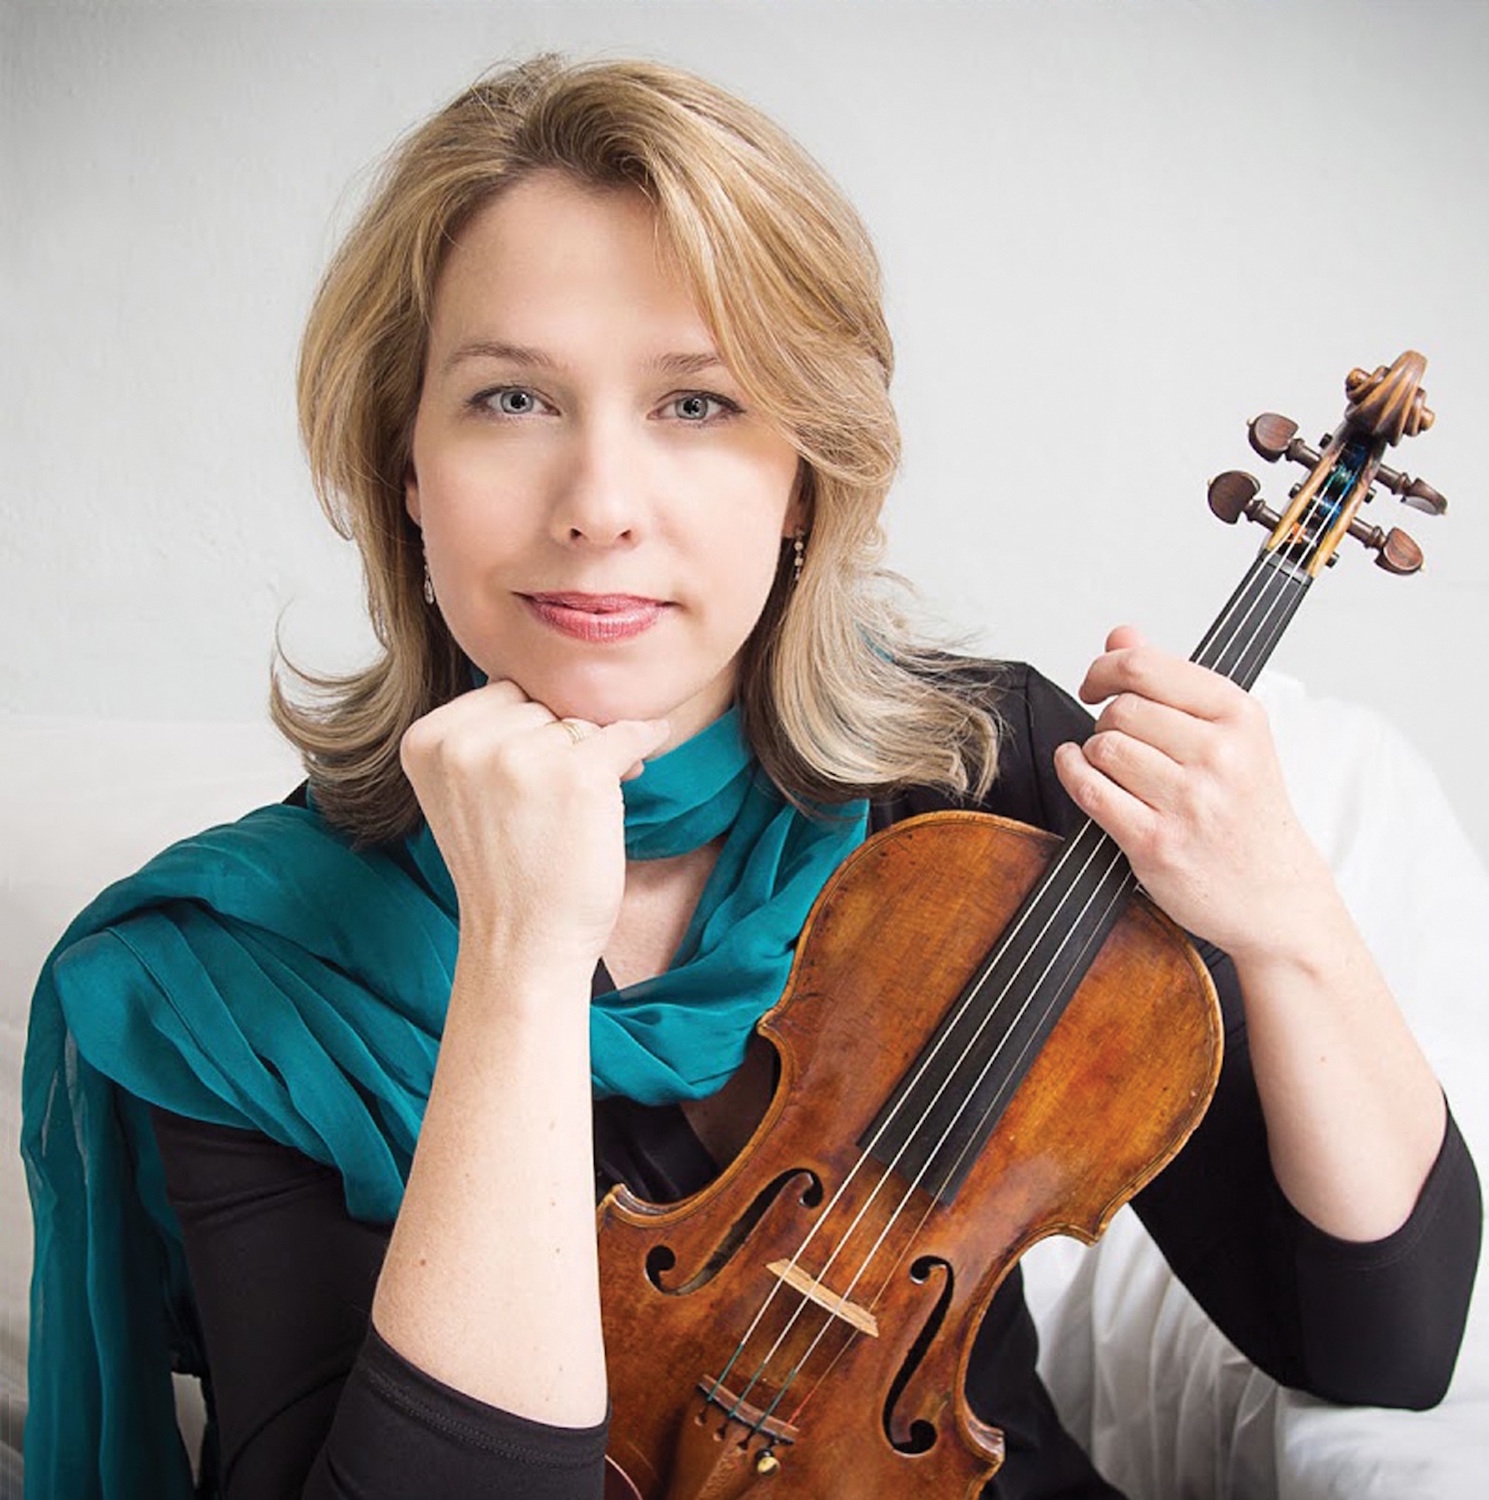 Wearing a black top and teal scarf, a blond woman holds up her violin.